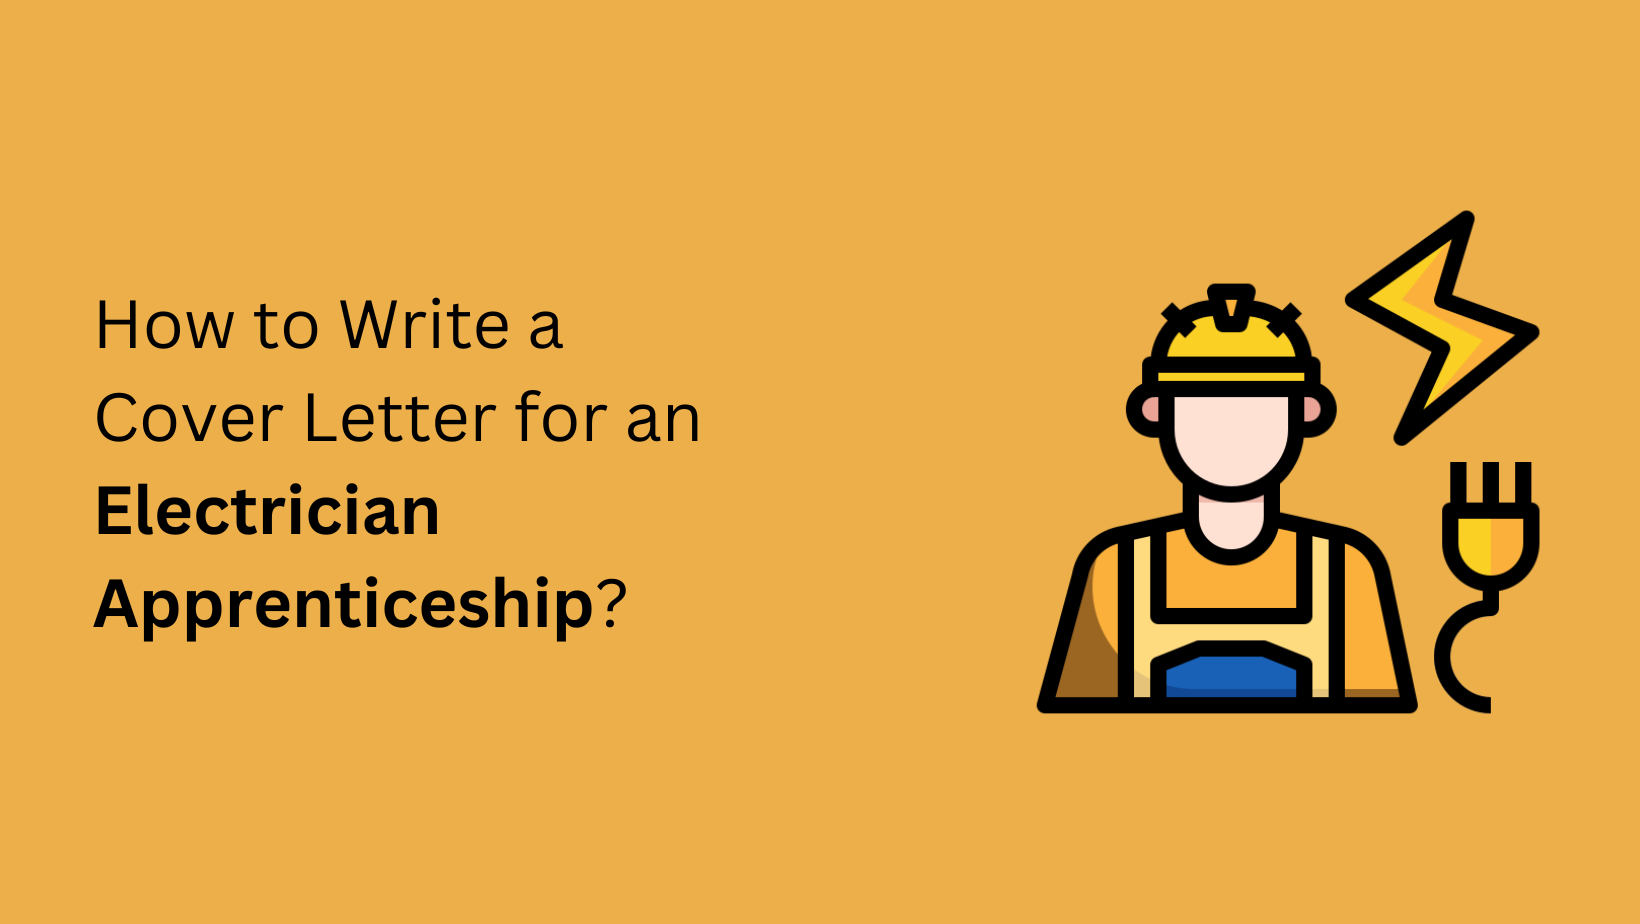 How to Write a Cover Letter for an Electrician Apprenticeship